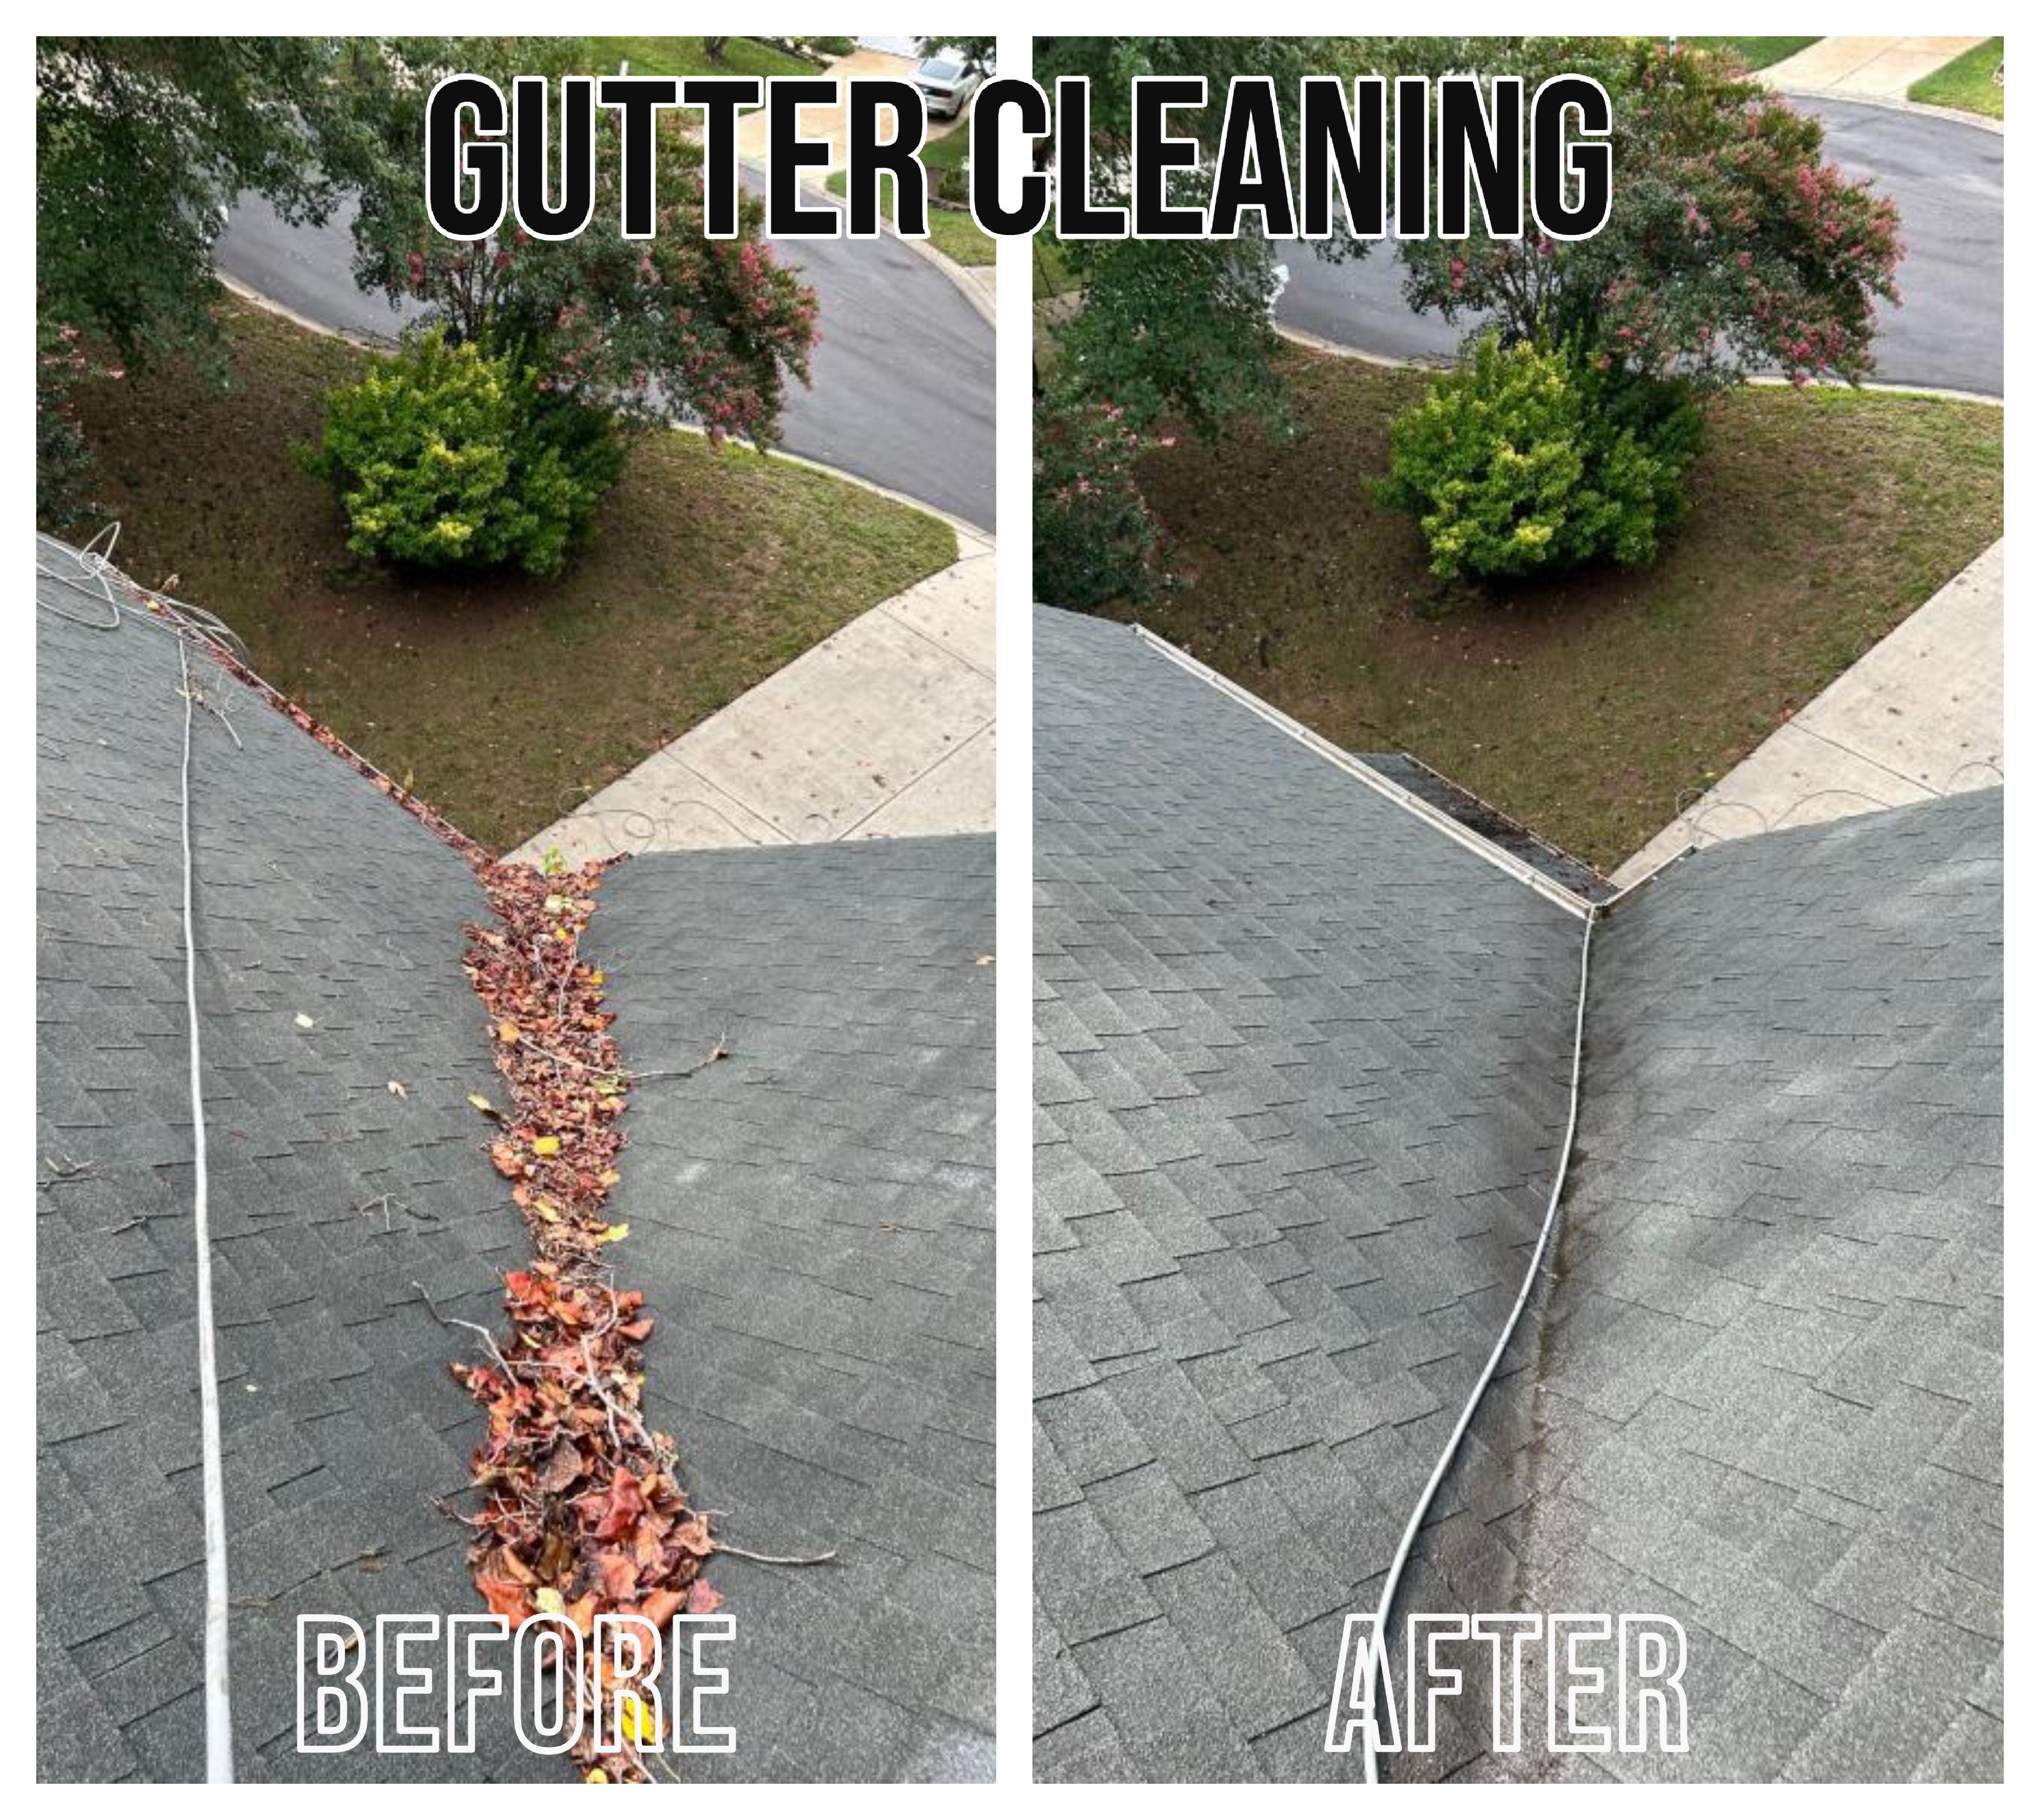 Another Premium Gutter Cleaning in Cornelius, NC!